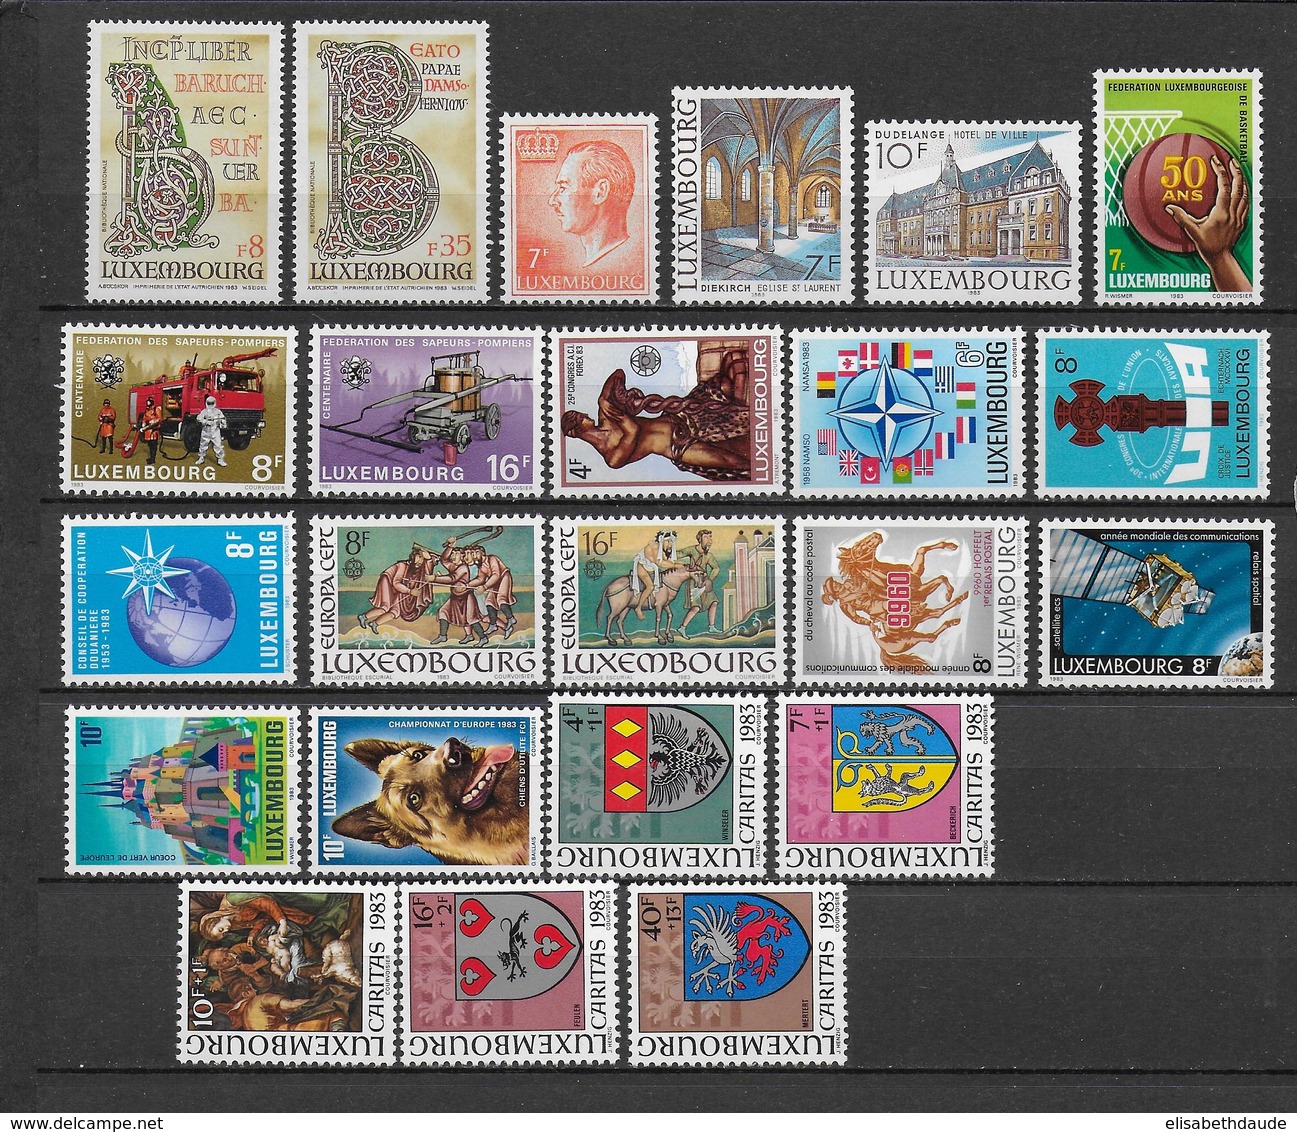 LUXEMBOURG - ANNEE COMPLETE 1983 ** MNH - - Années Complètes